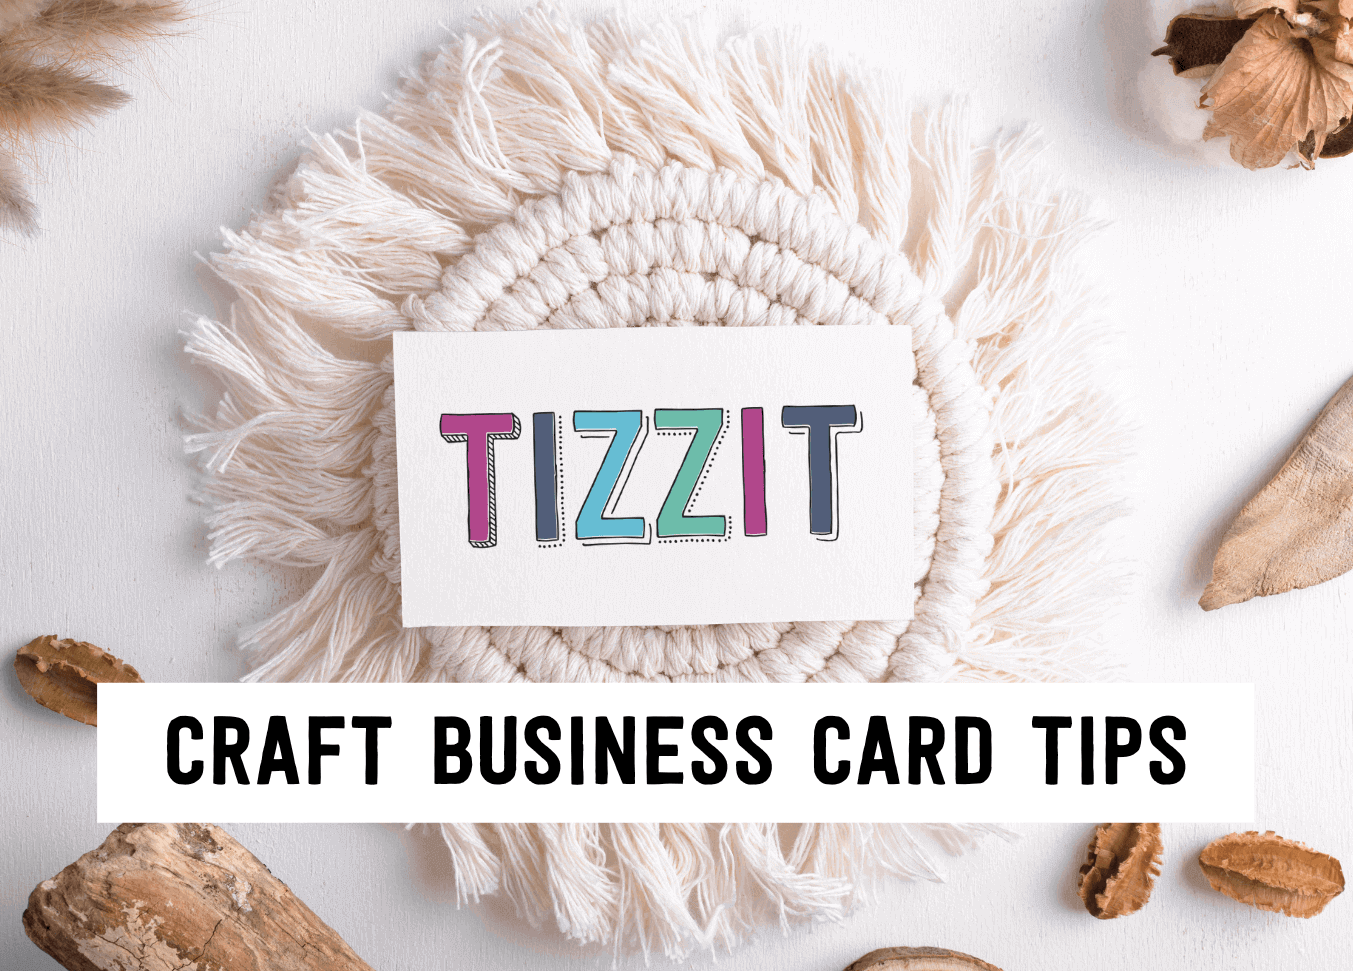 Tizzit Craft Business Card Tips | Tizzit.co - start and grow a successful handmade business